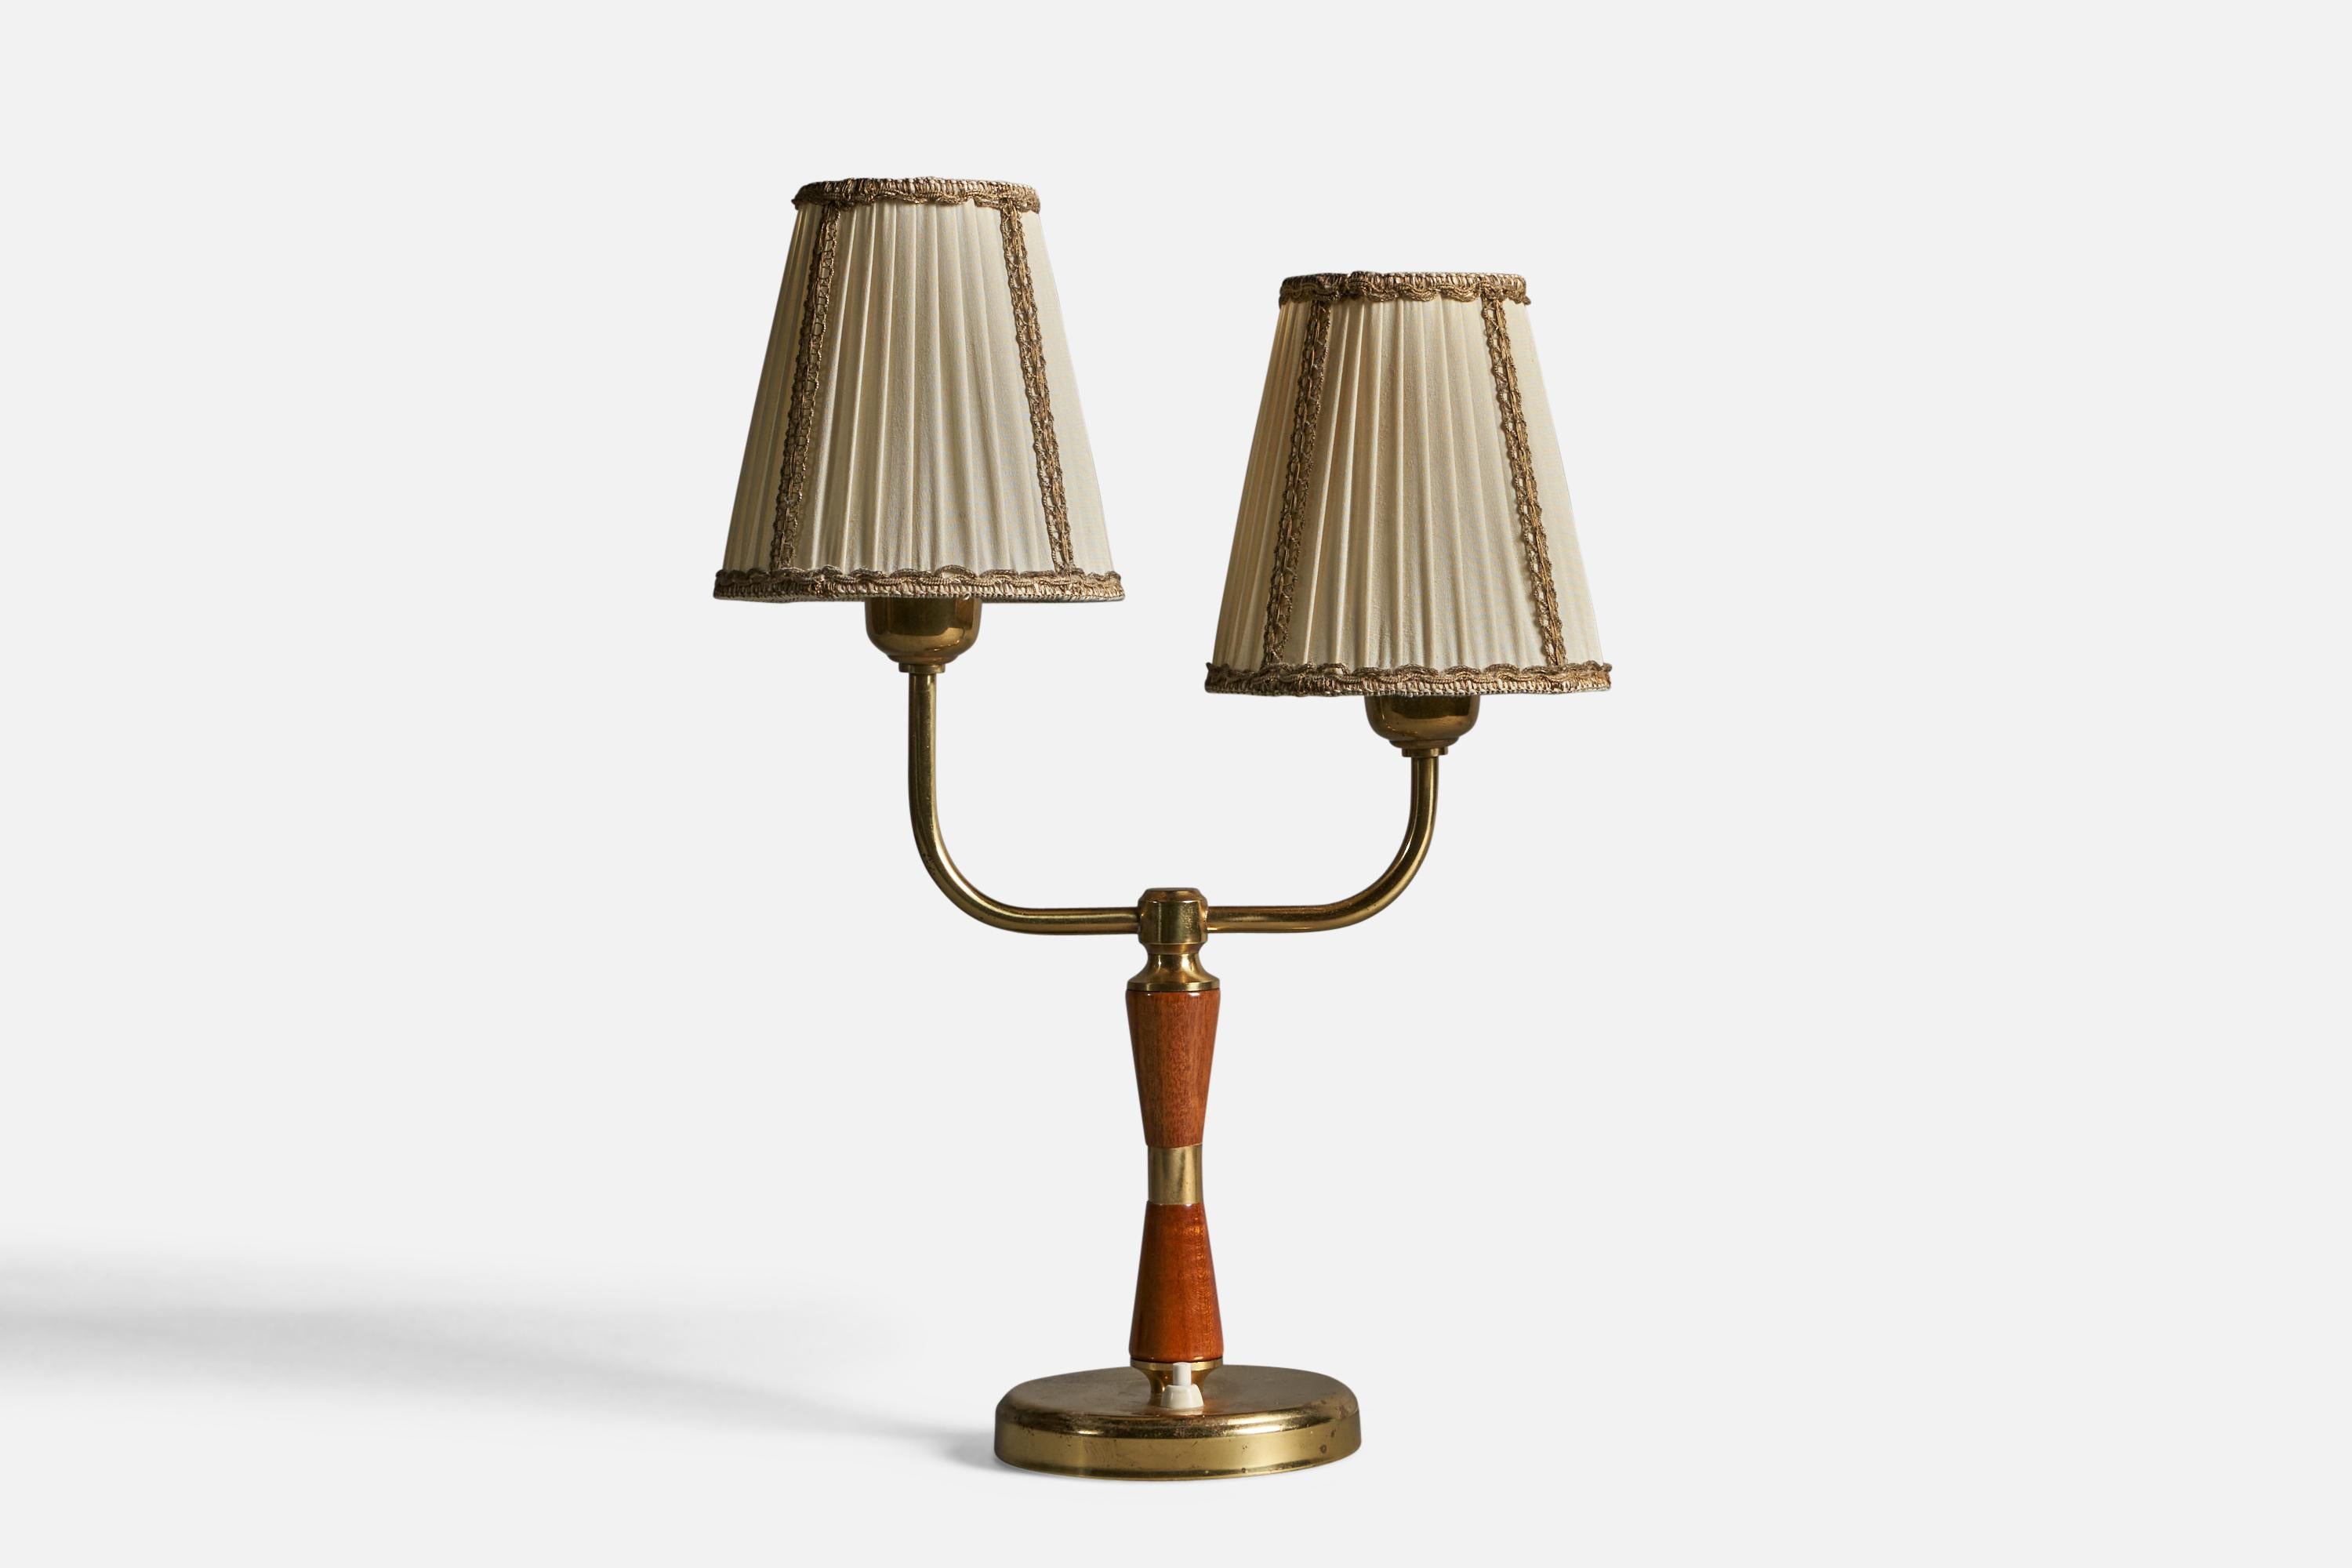 A two-armed brass, beige fabric and stained oak table lamp, designed and produced by Eos, Sweden, 1940s.

Overall Dimensions (inches): 17.25